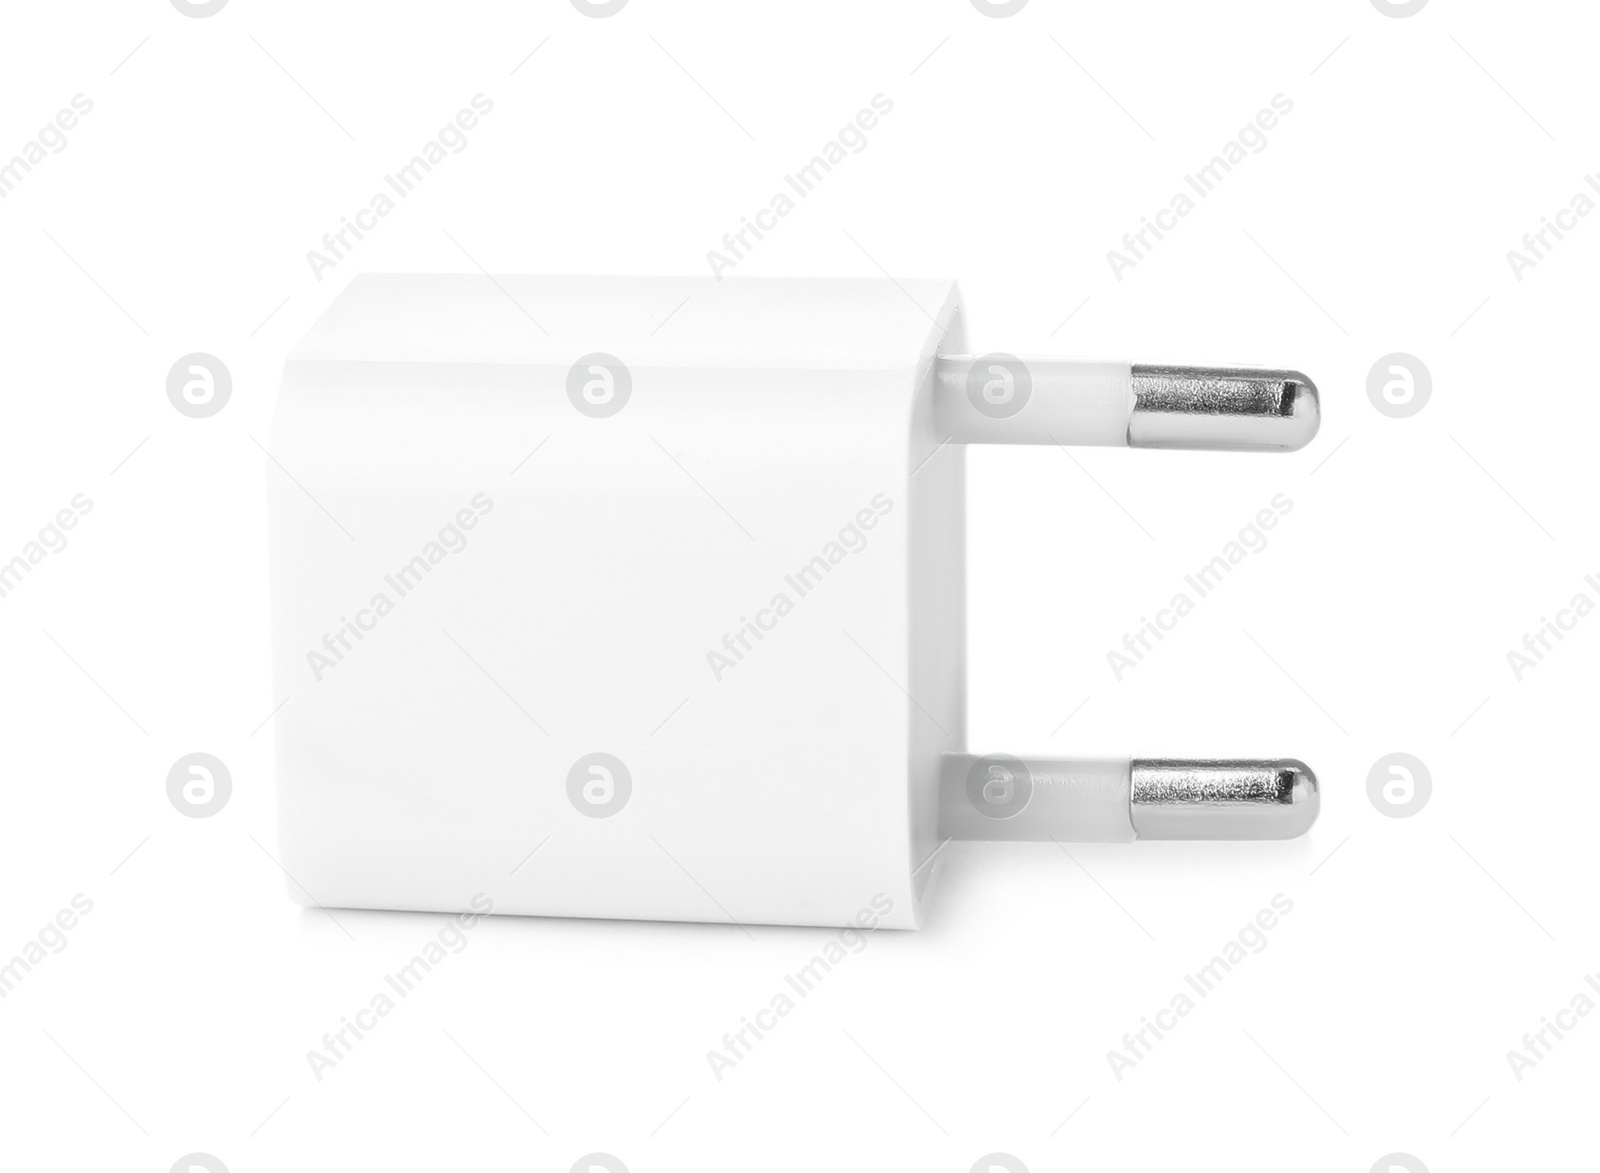 Photo of USB power adapter for battery charging isolated on white